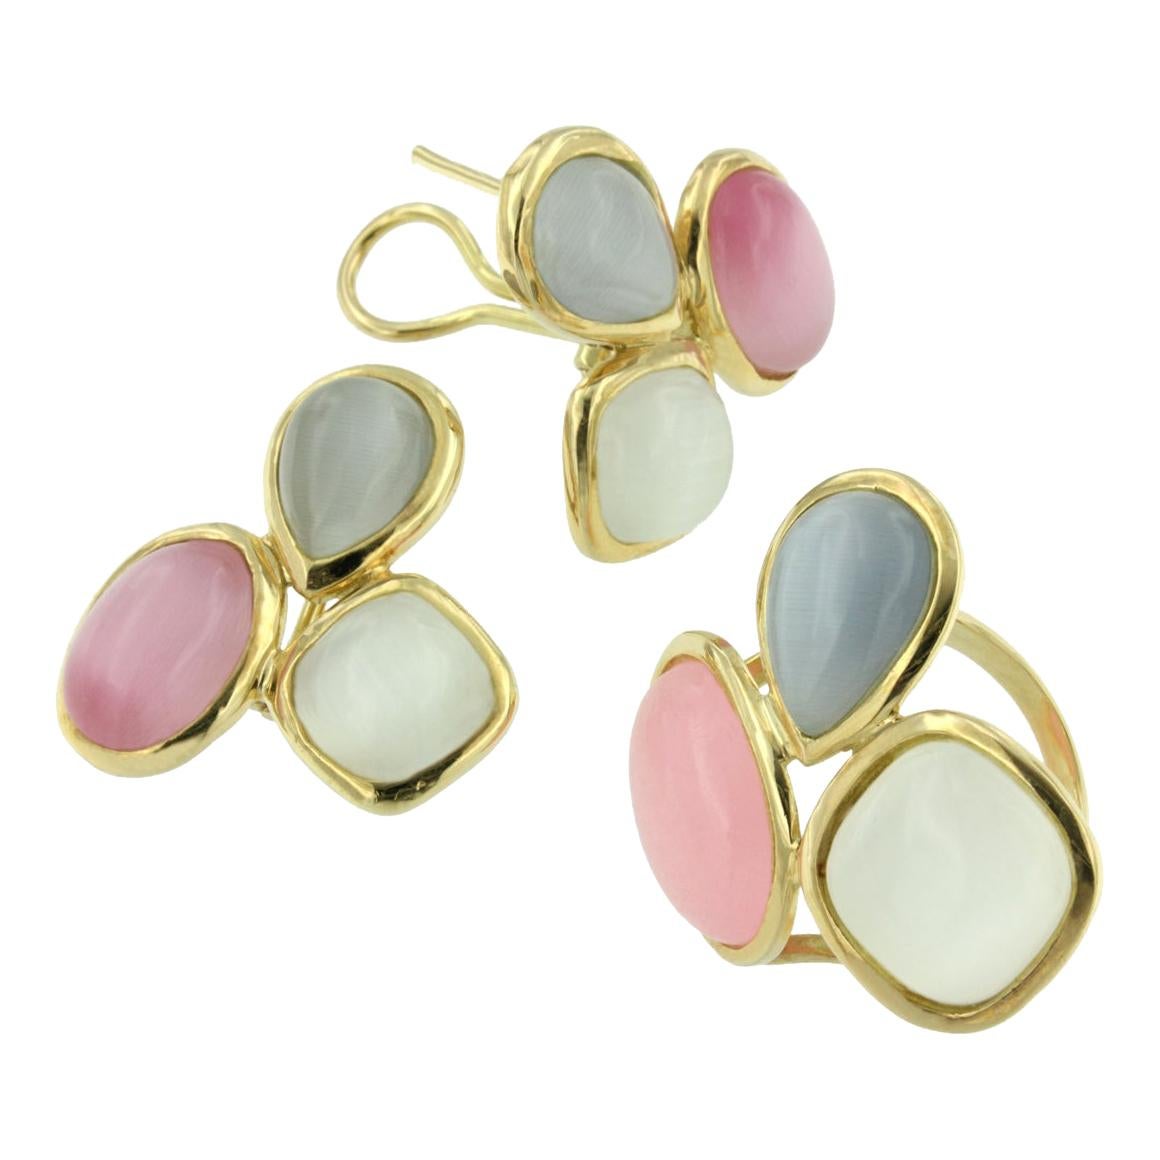 18 Karat Yellow Gold with Colored Moonstone Ring Earrings and Pendant Set